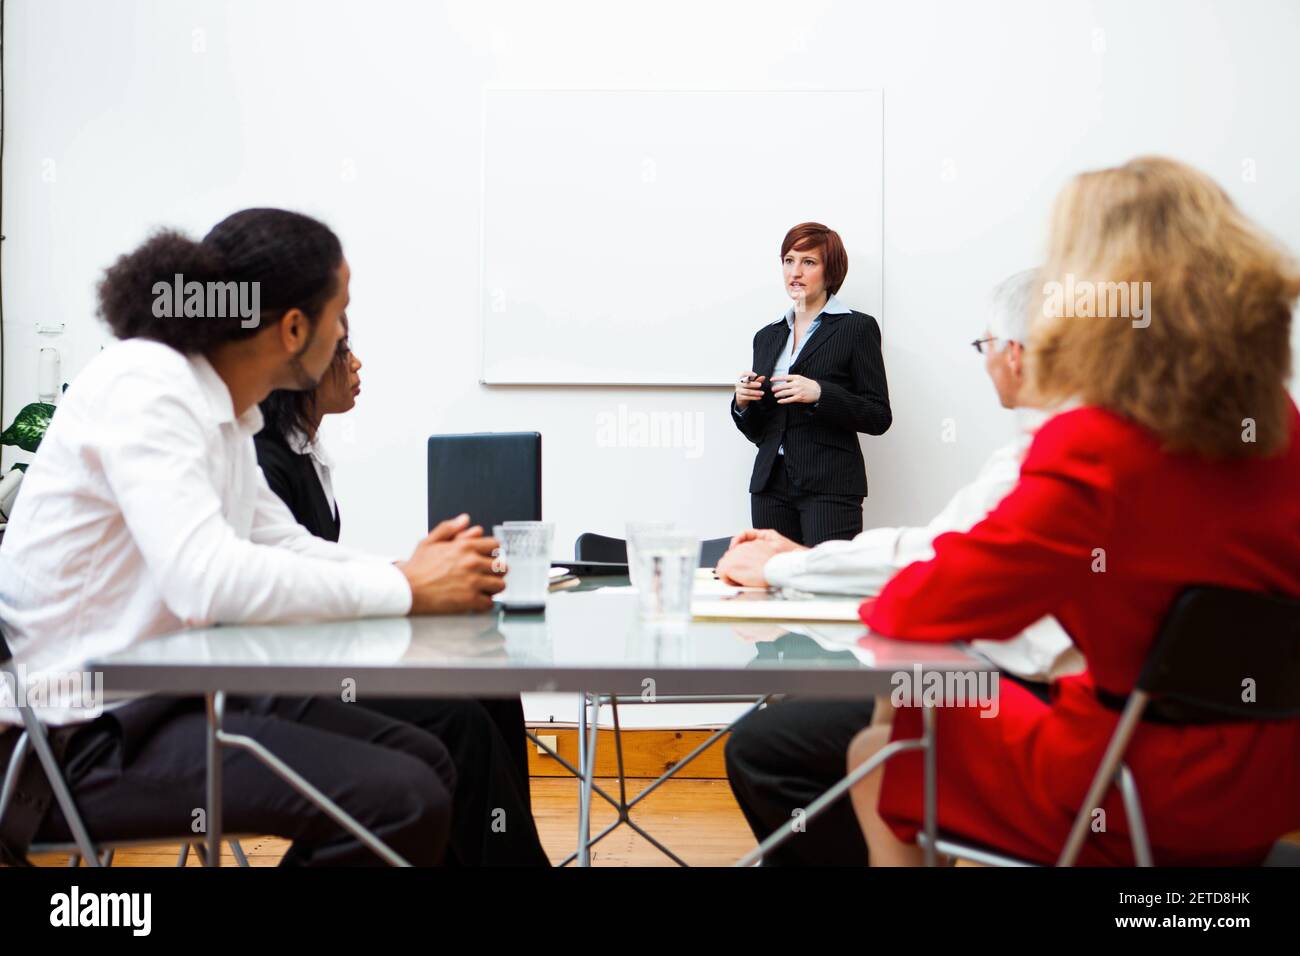 Woman giving a presentation with a white board. Stock Photo